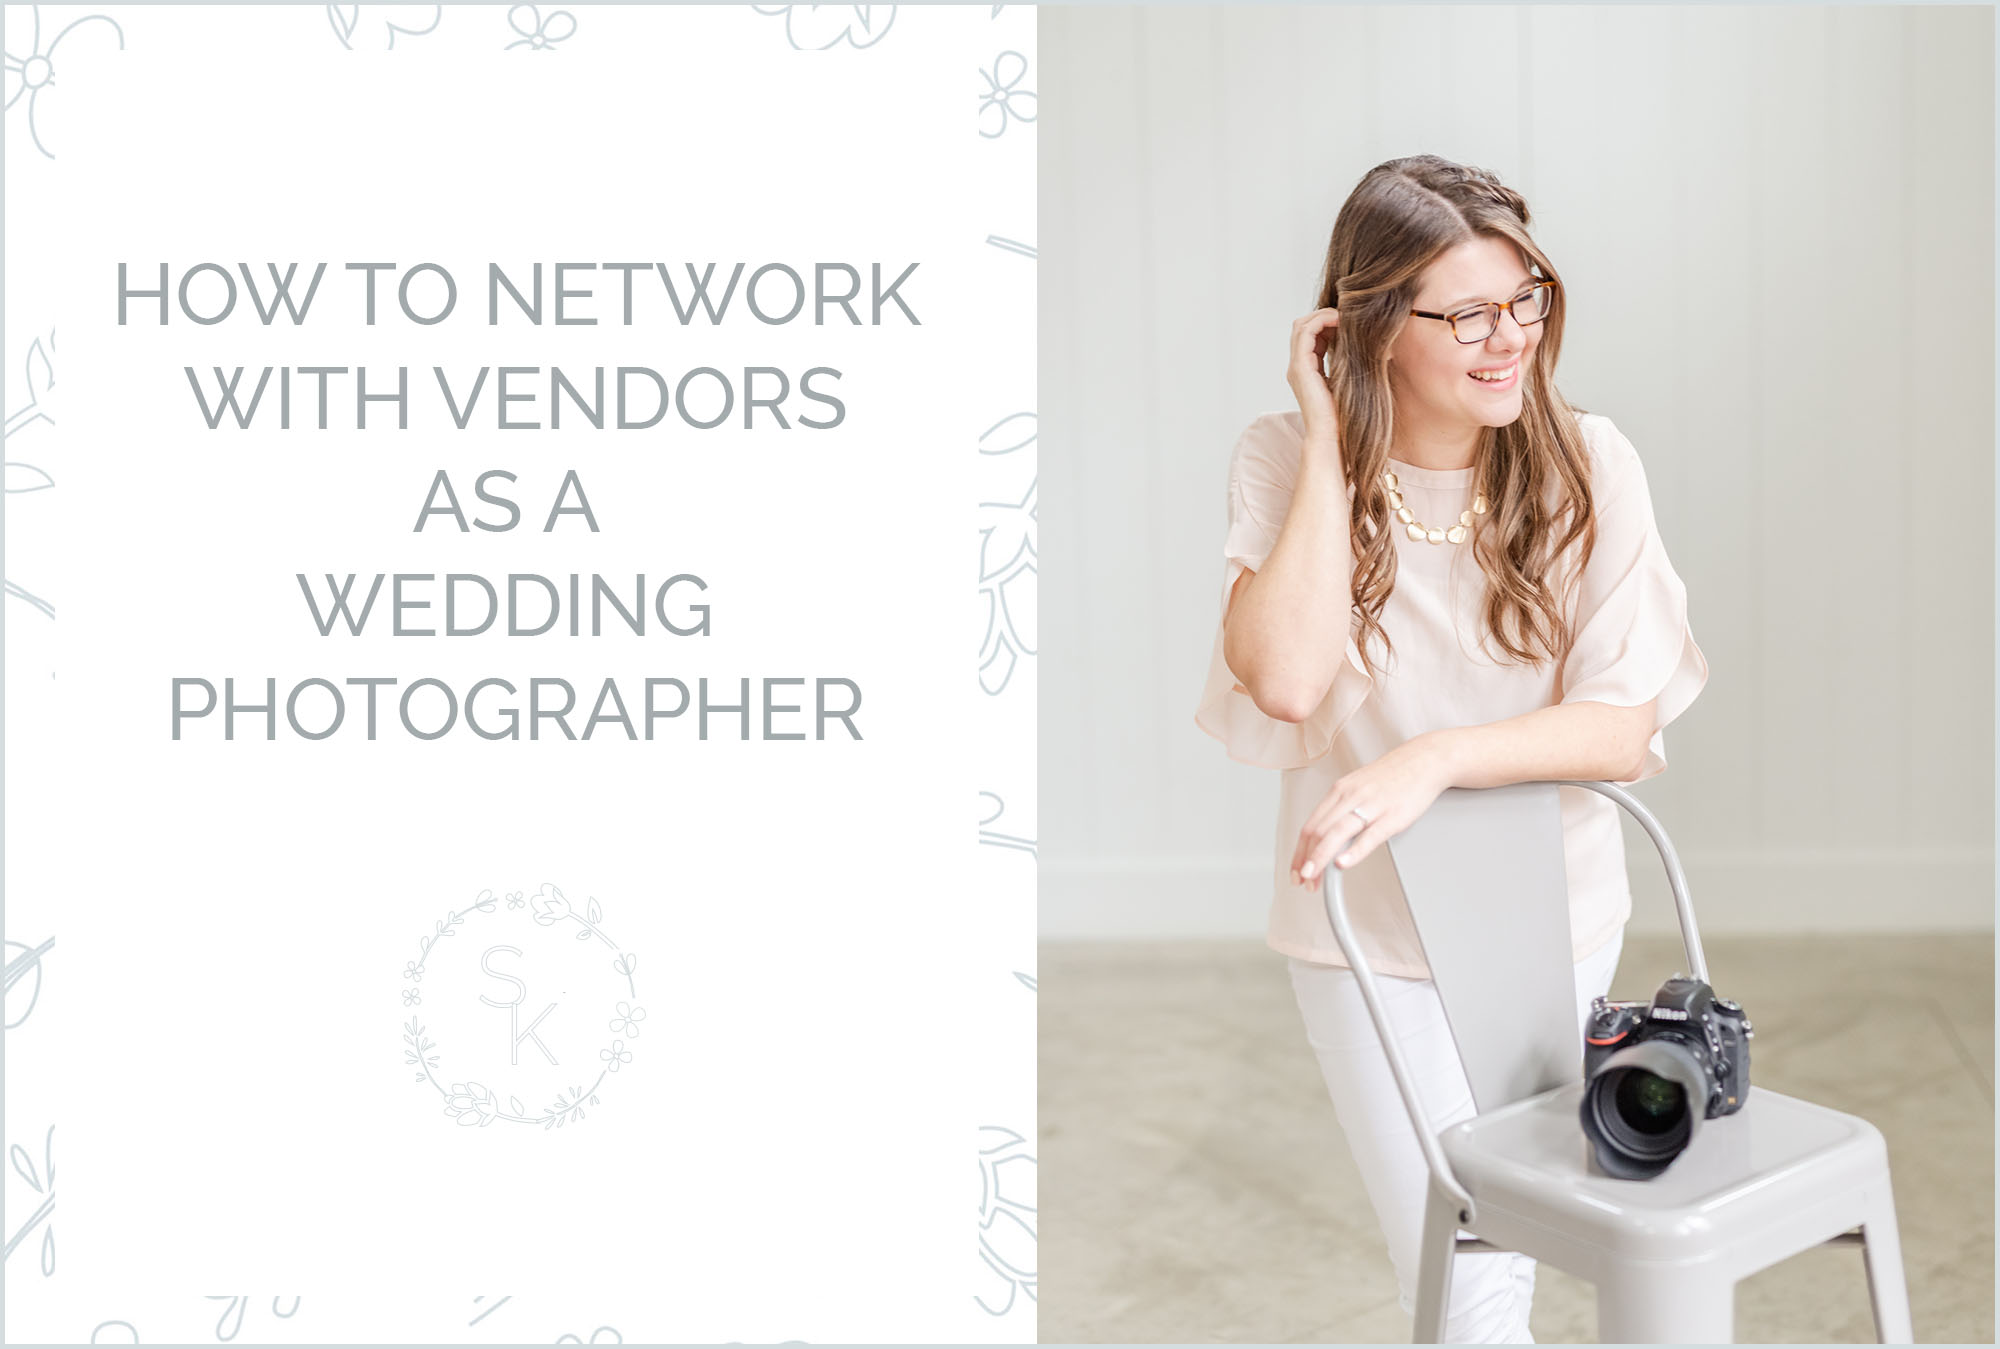 How to Network with Vendors as a Wedding Photographer